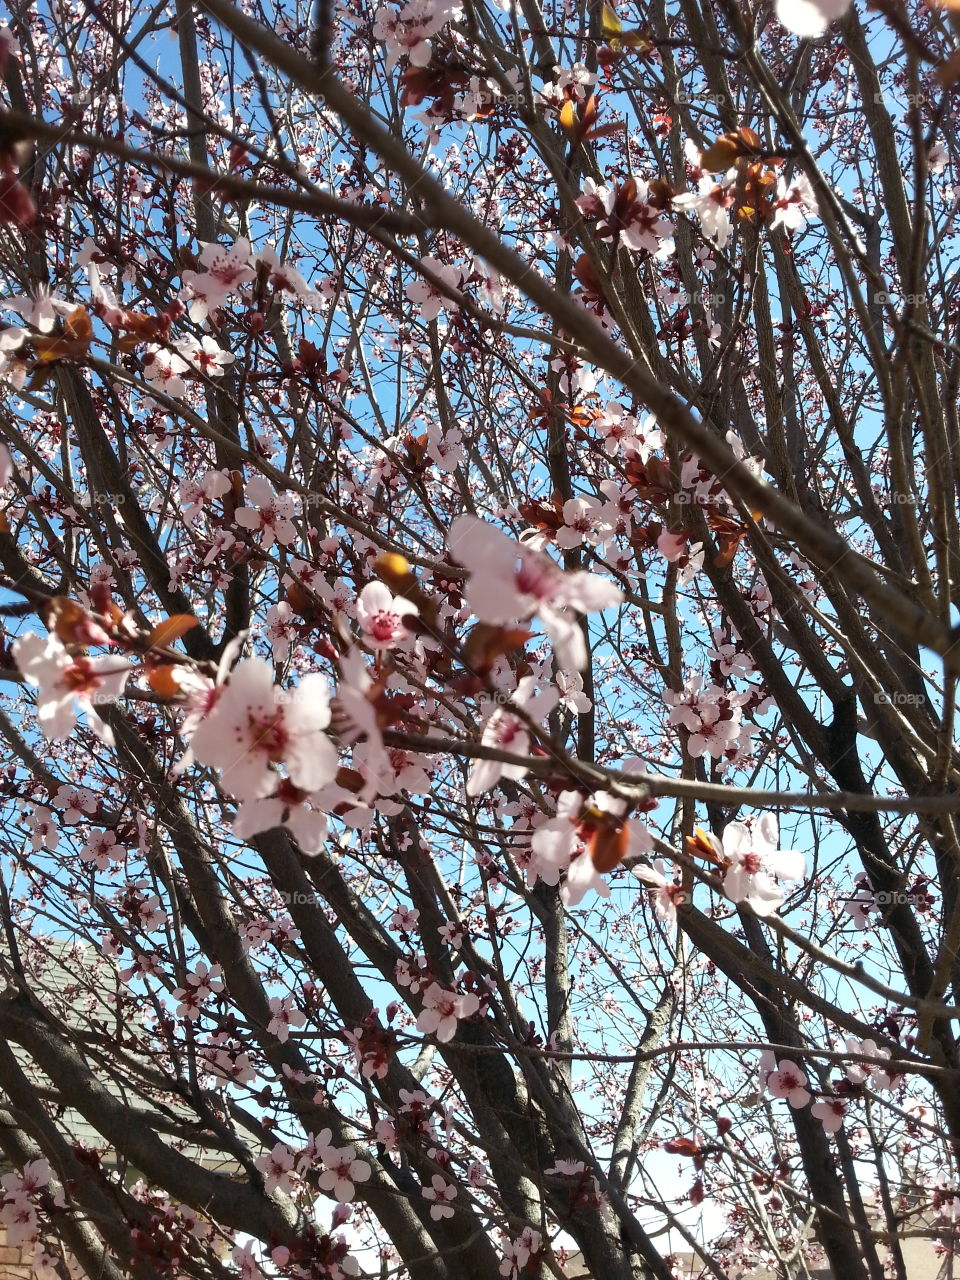 plum blossoms. lots of plum blossoms in my yard